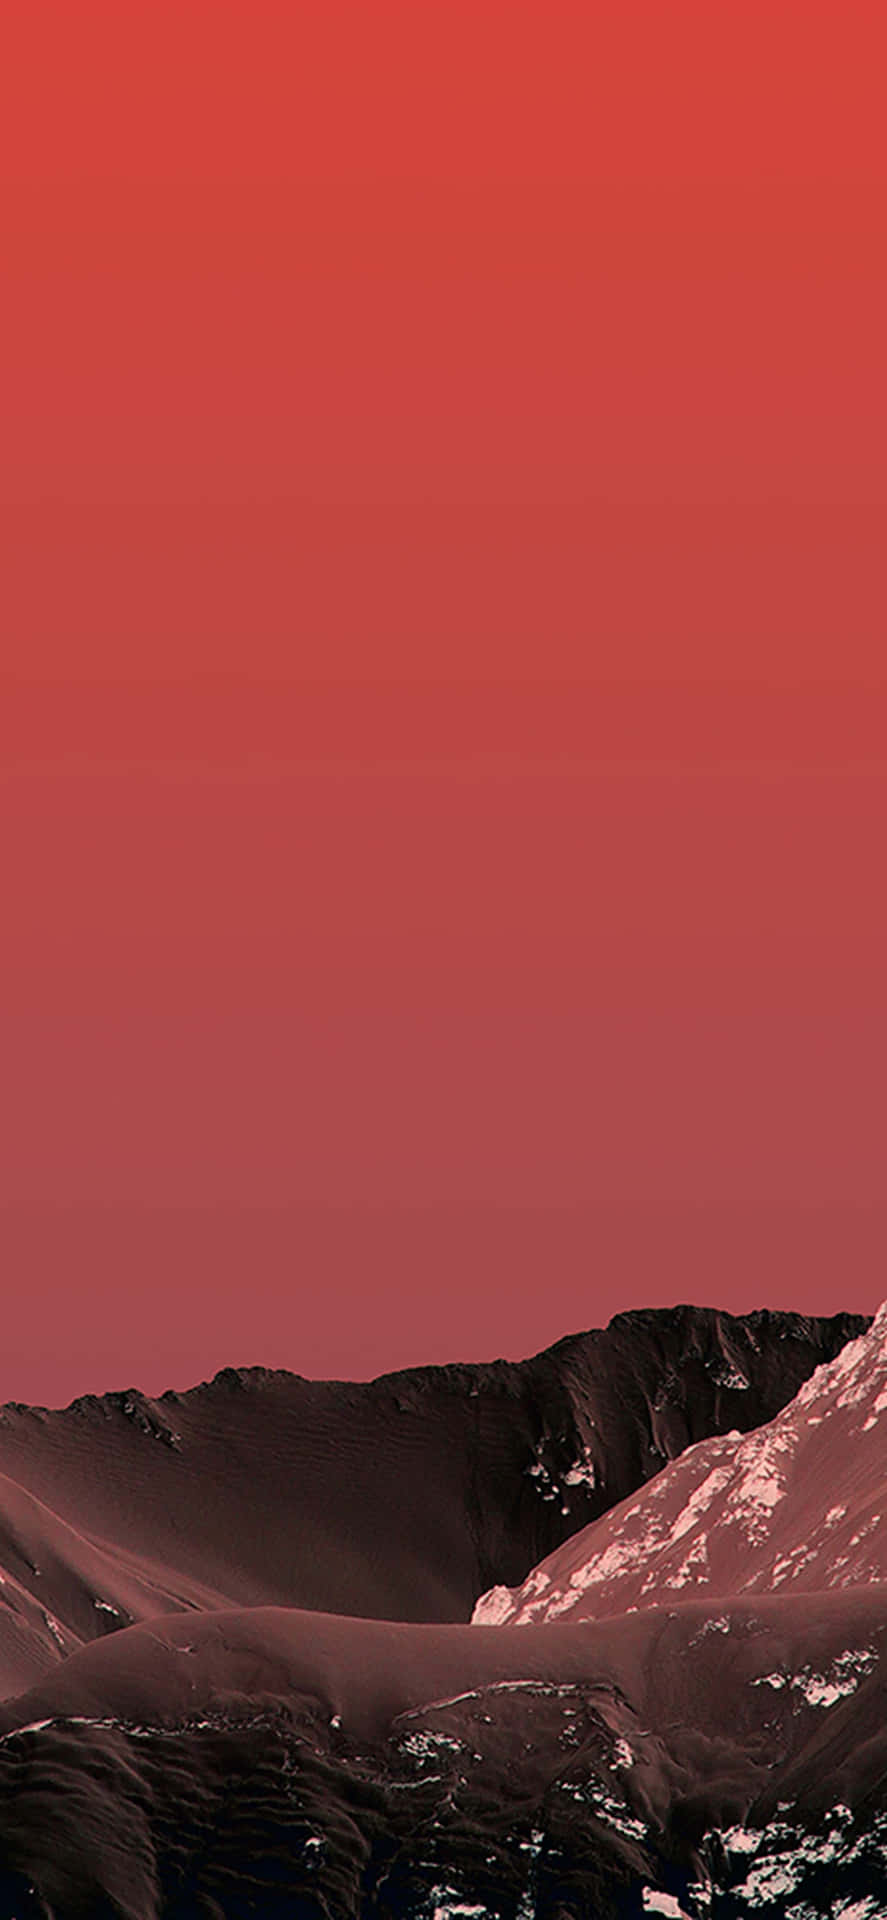 Bold and stylish, this Red iPhone wallpaper shows technology at its best.